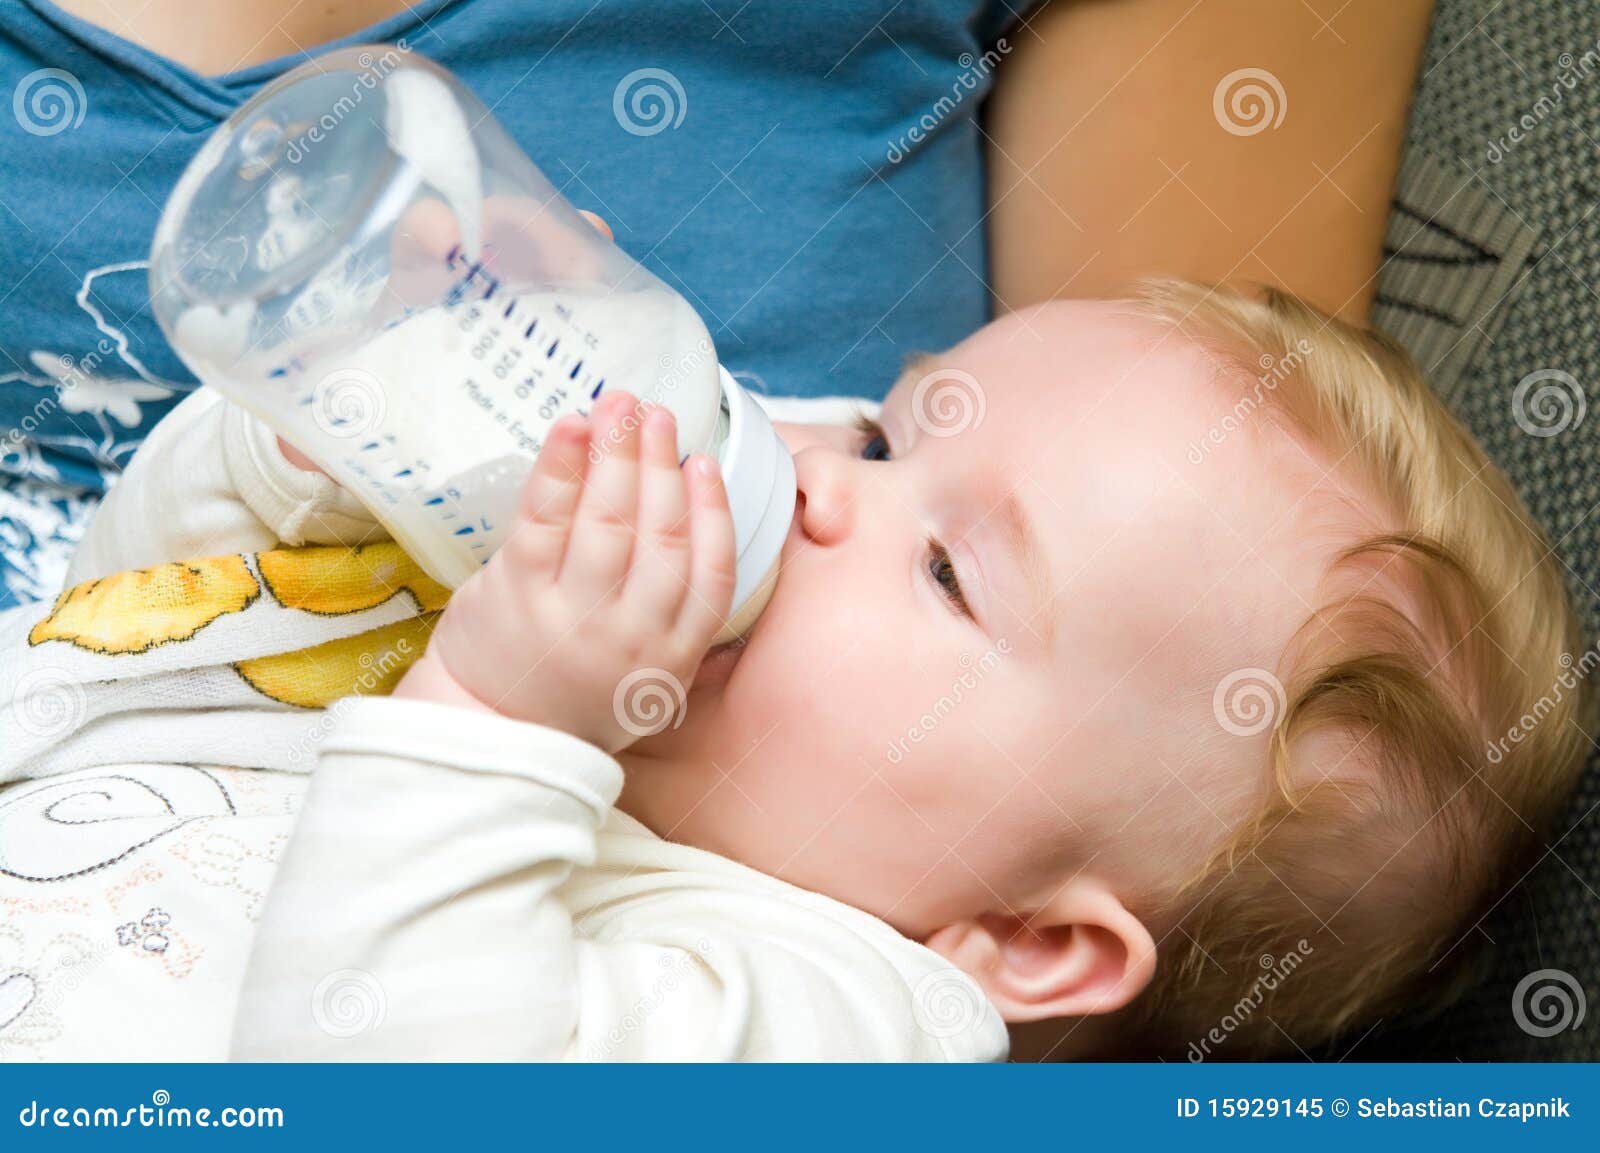 baby eating from bottle